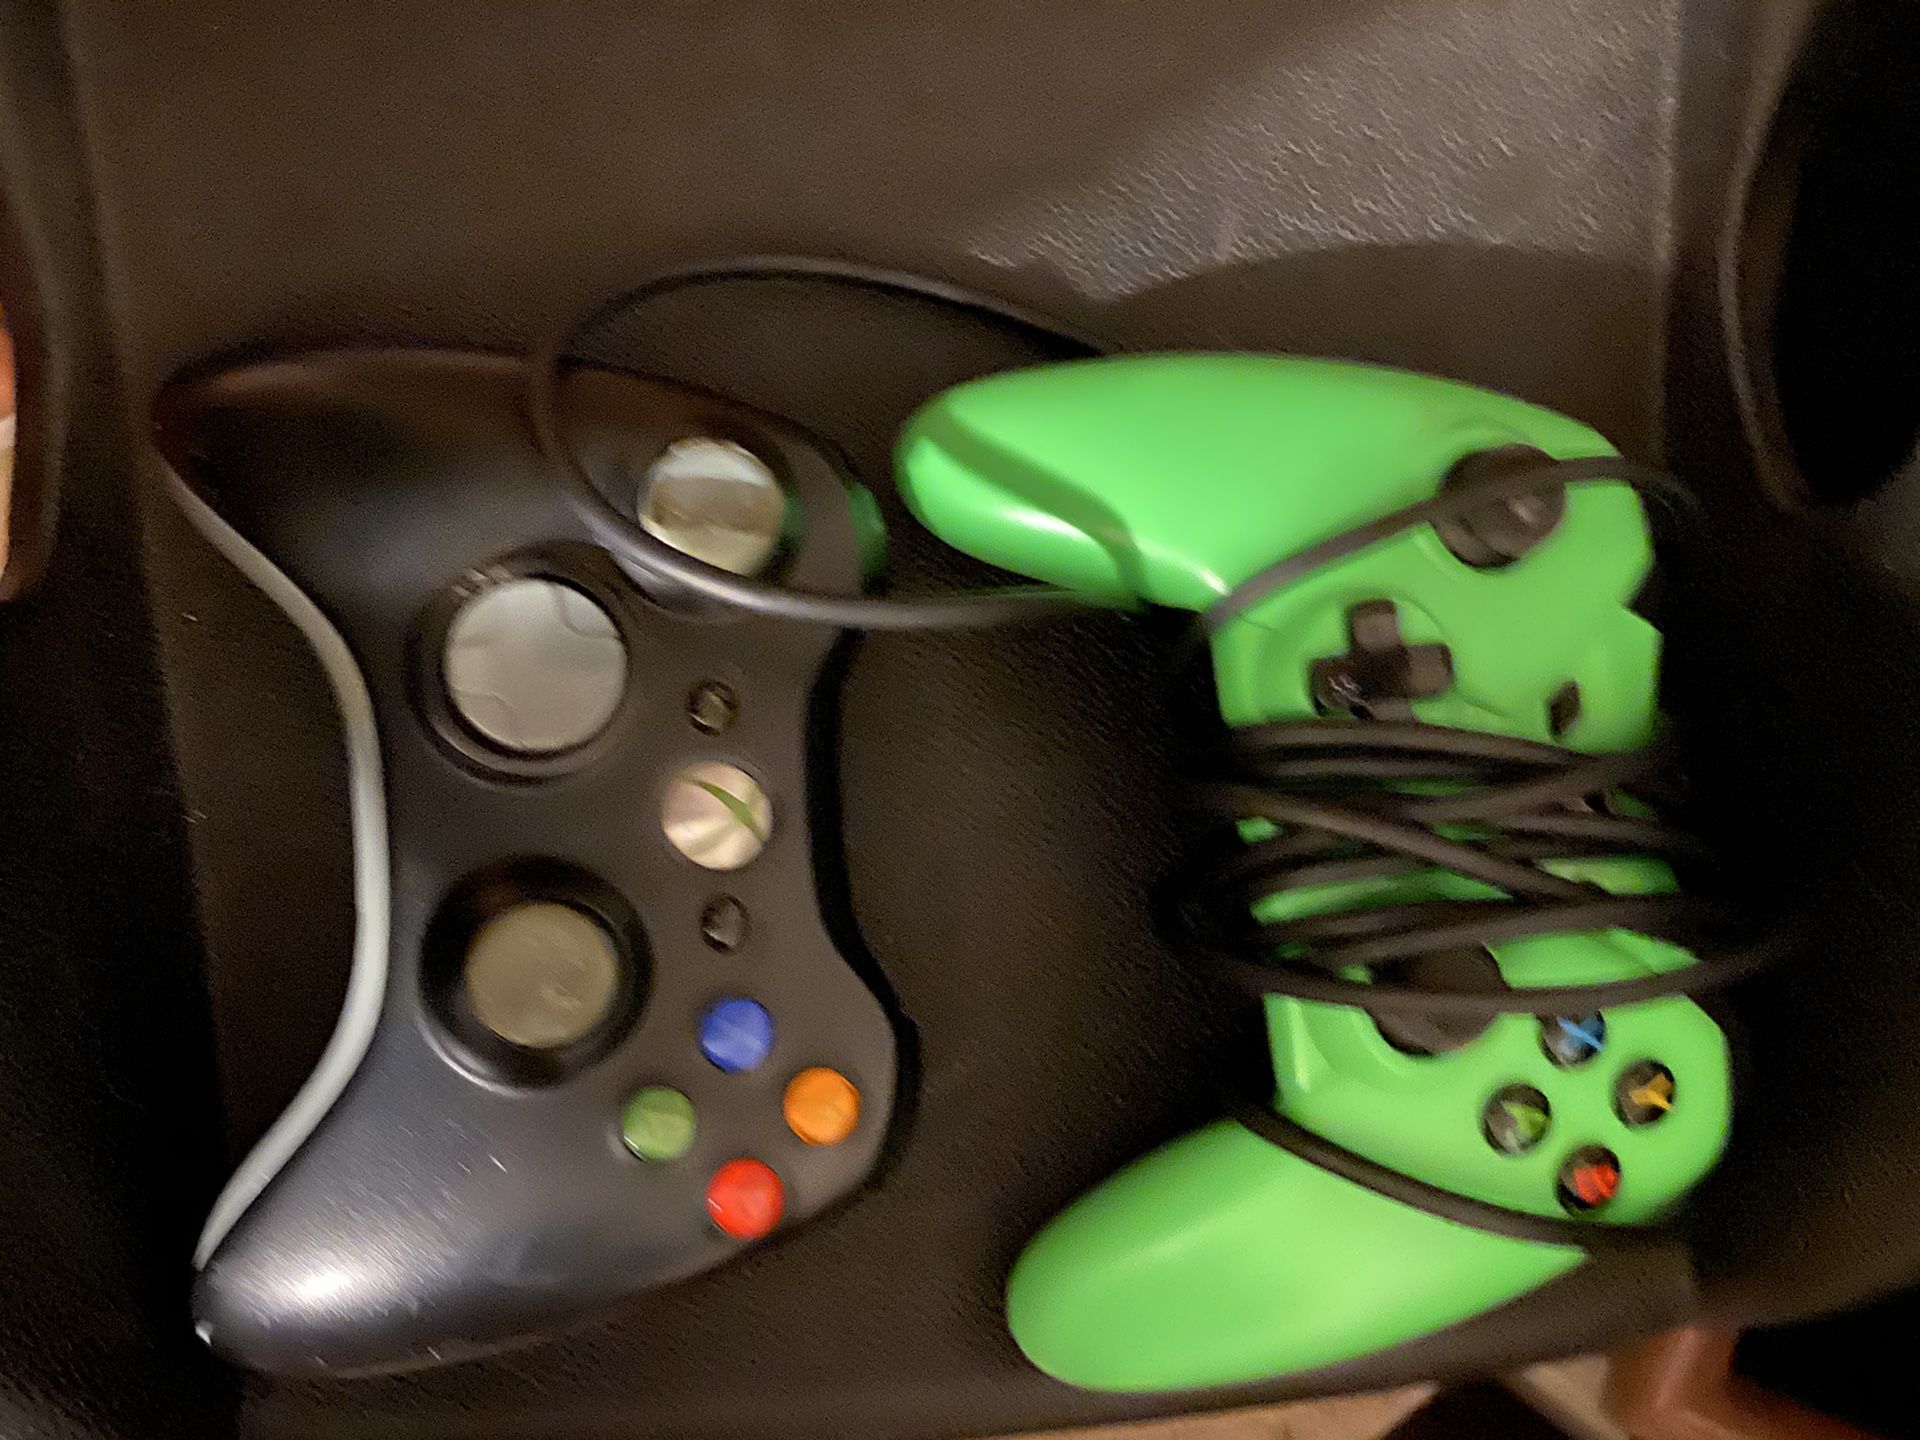 remotes for Xbox 360 games